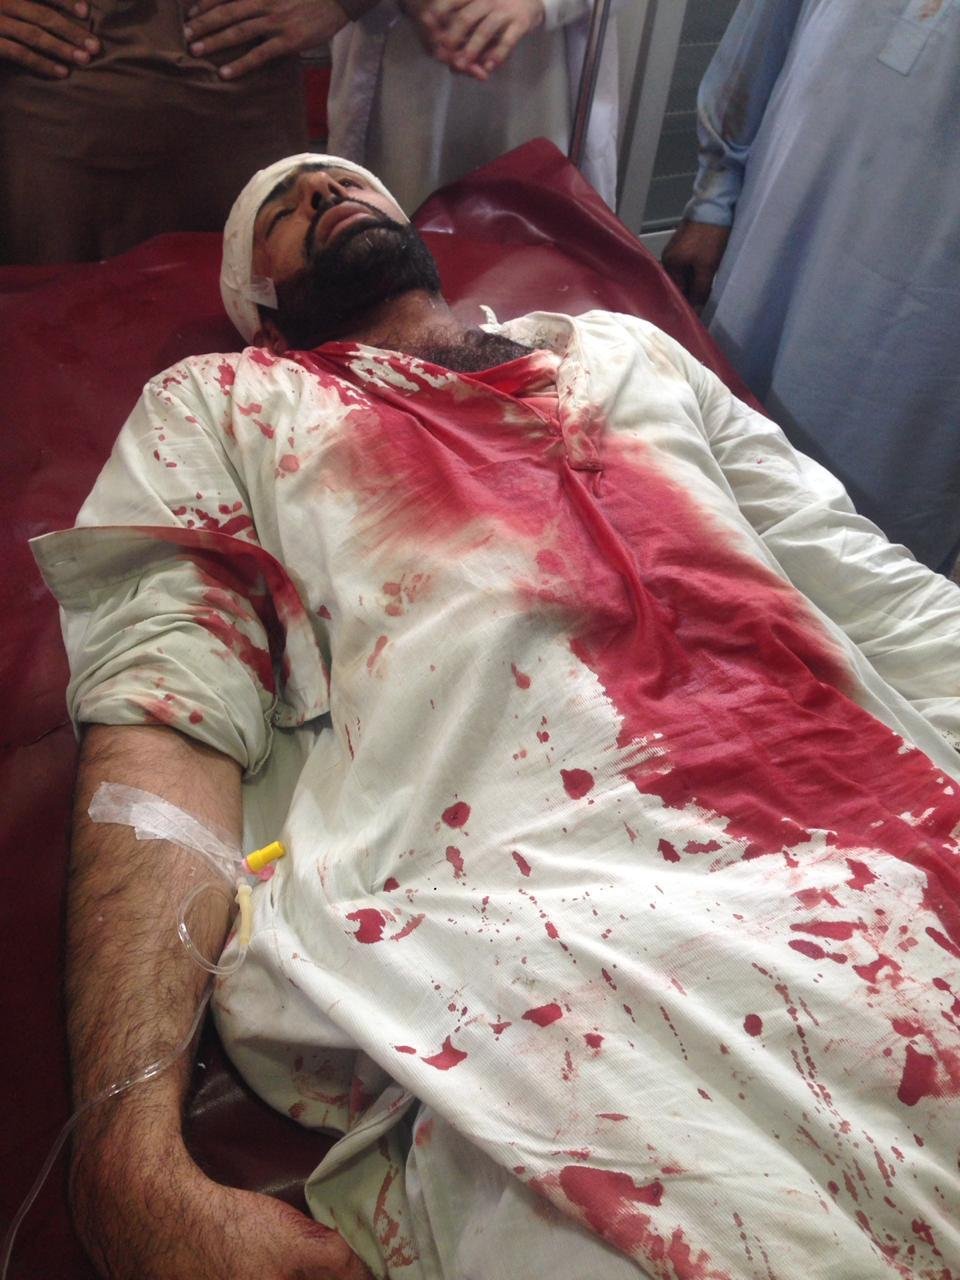 One of the Injured Doctors in Pakistan's Khyber Police Baton charge went to Coma.